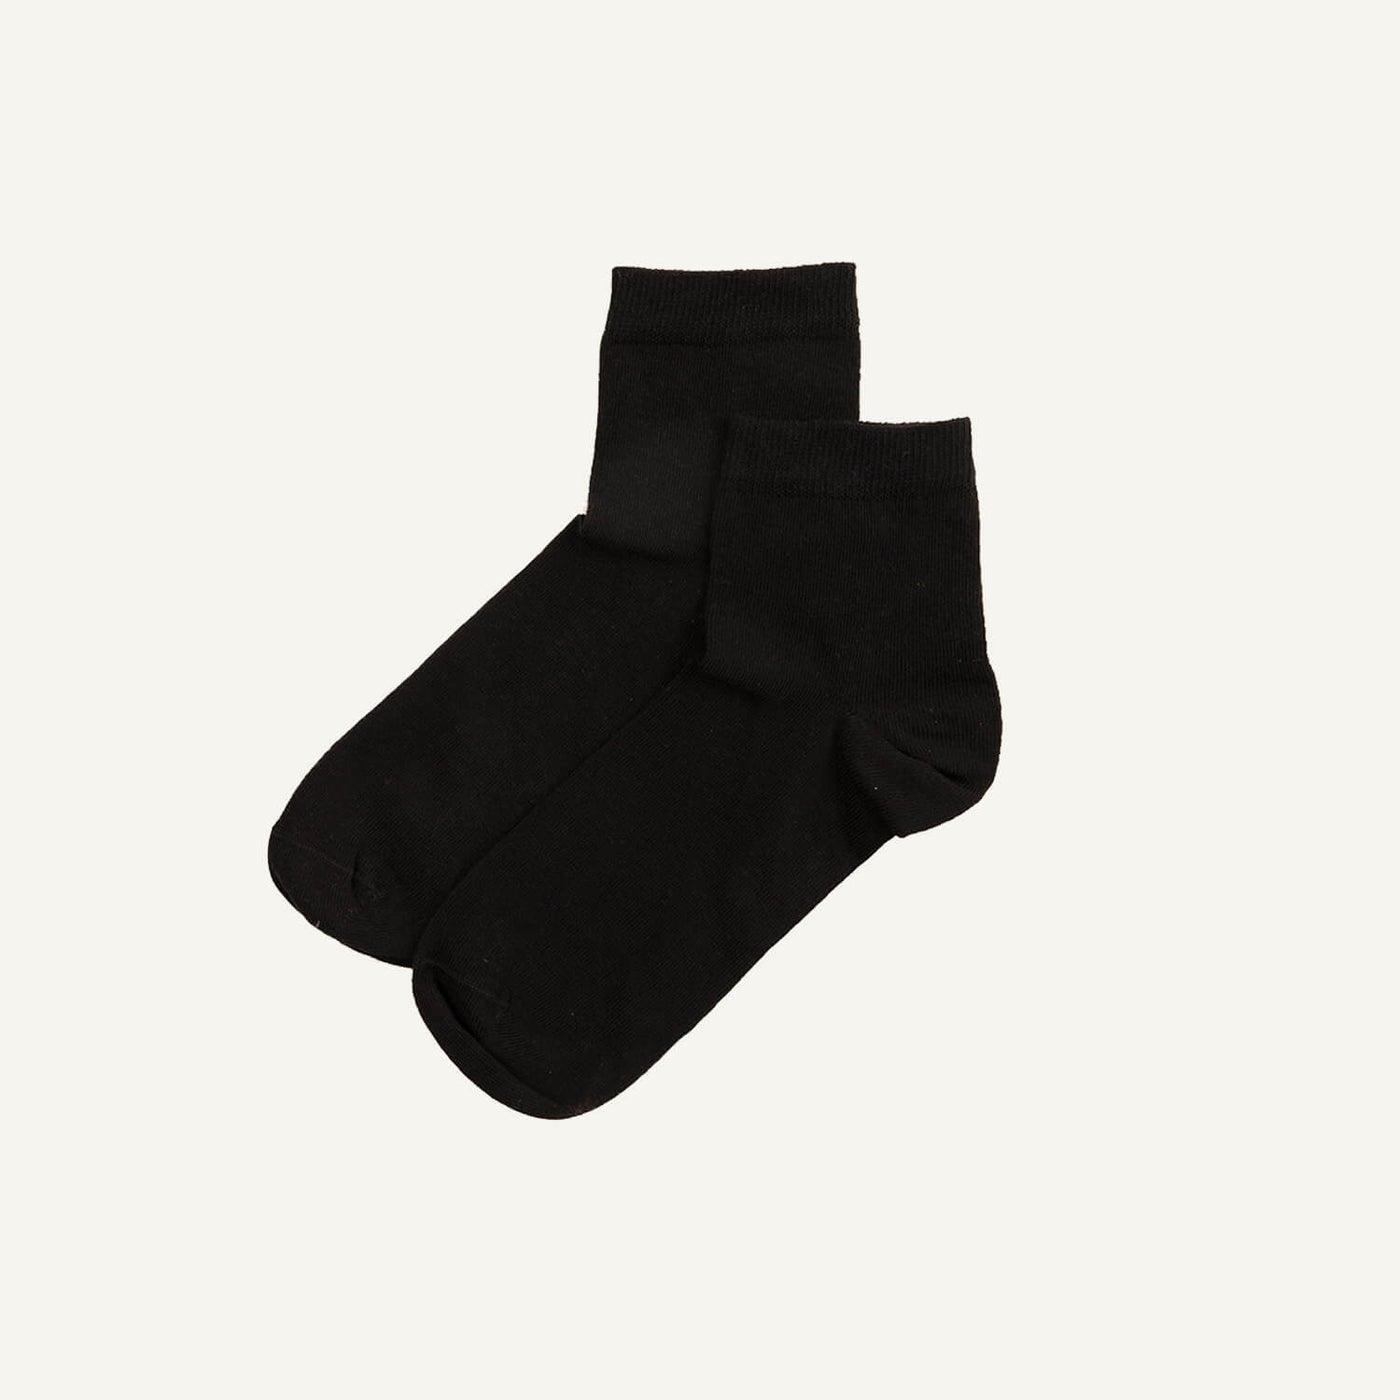 Subset Organic Cotton Lightweight Quarter Sock: Available in 3 colors